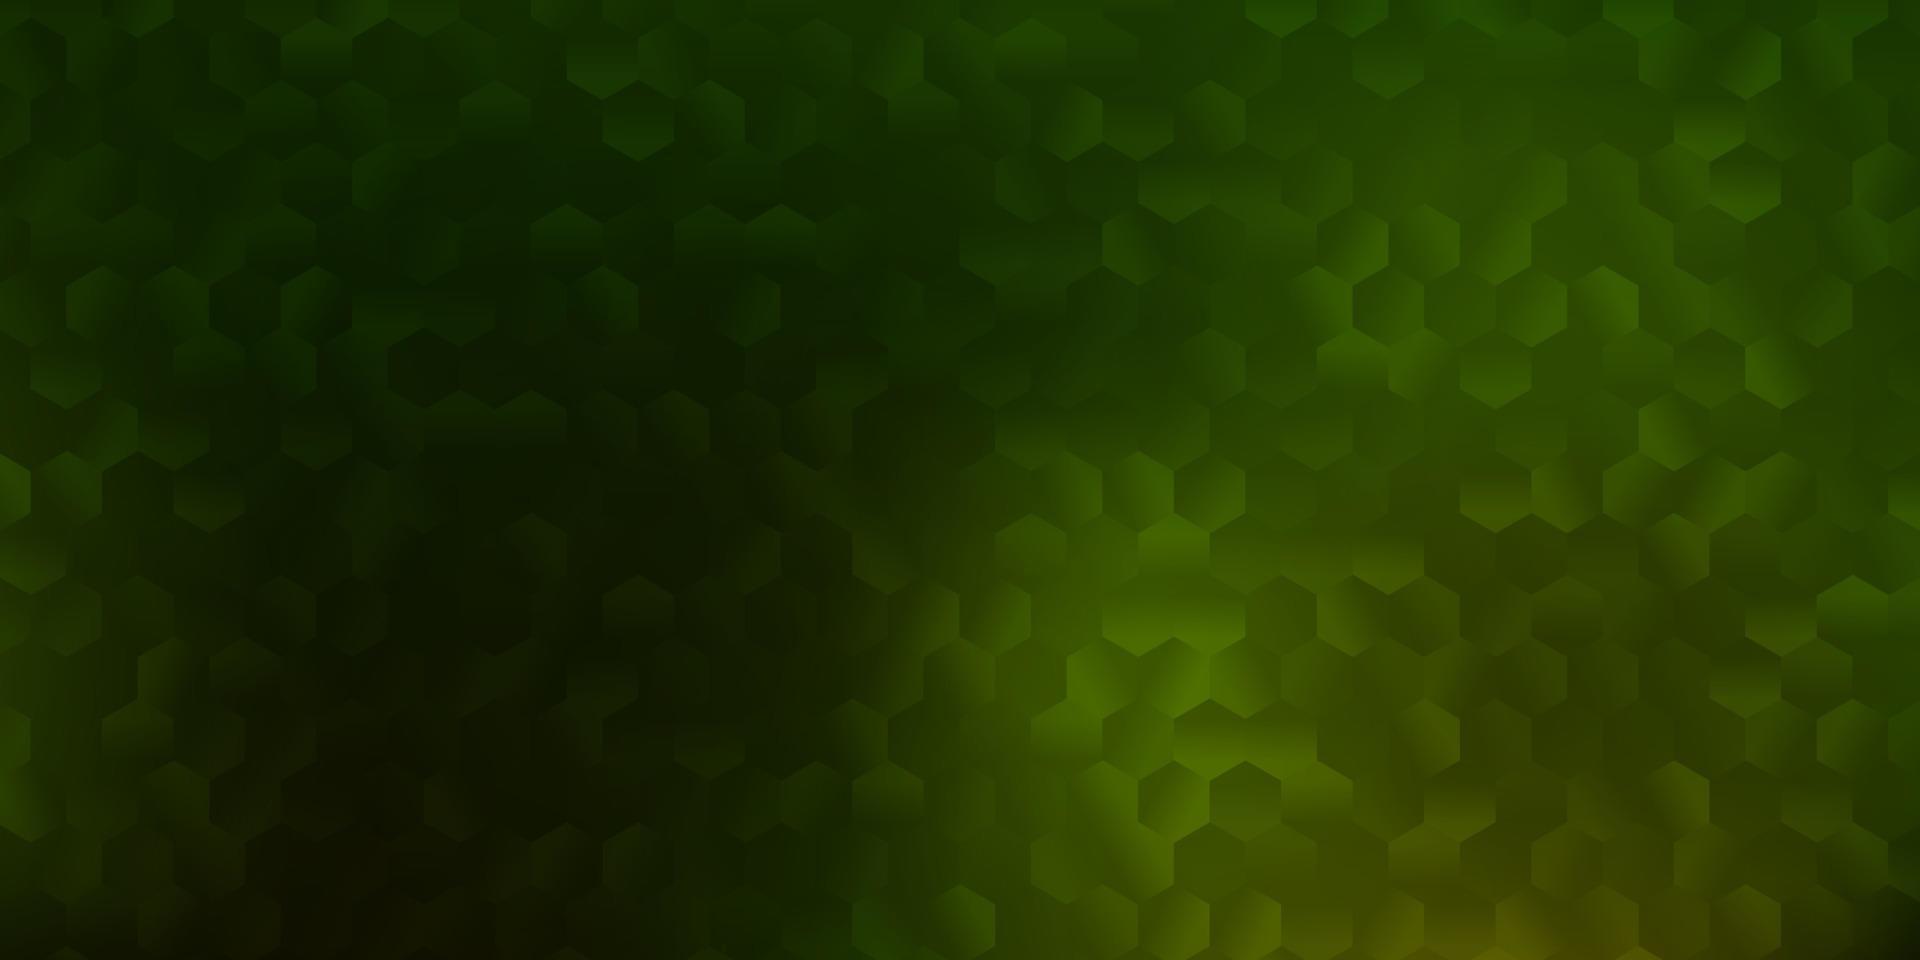 Dark green vector texture with colorful hexagons.